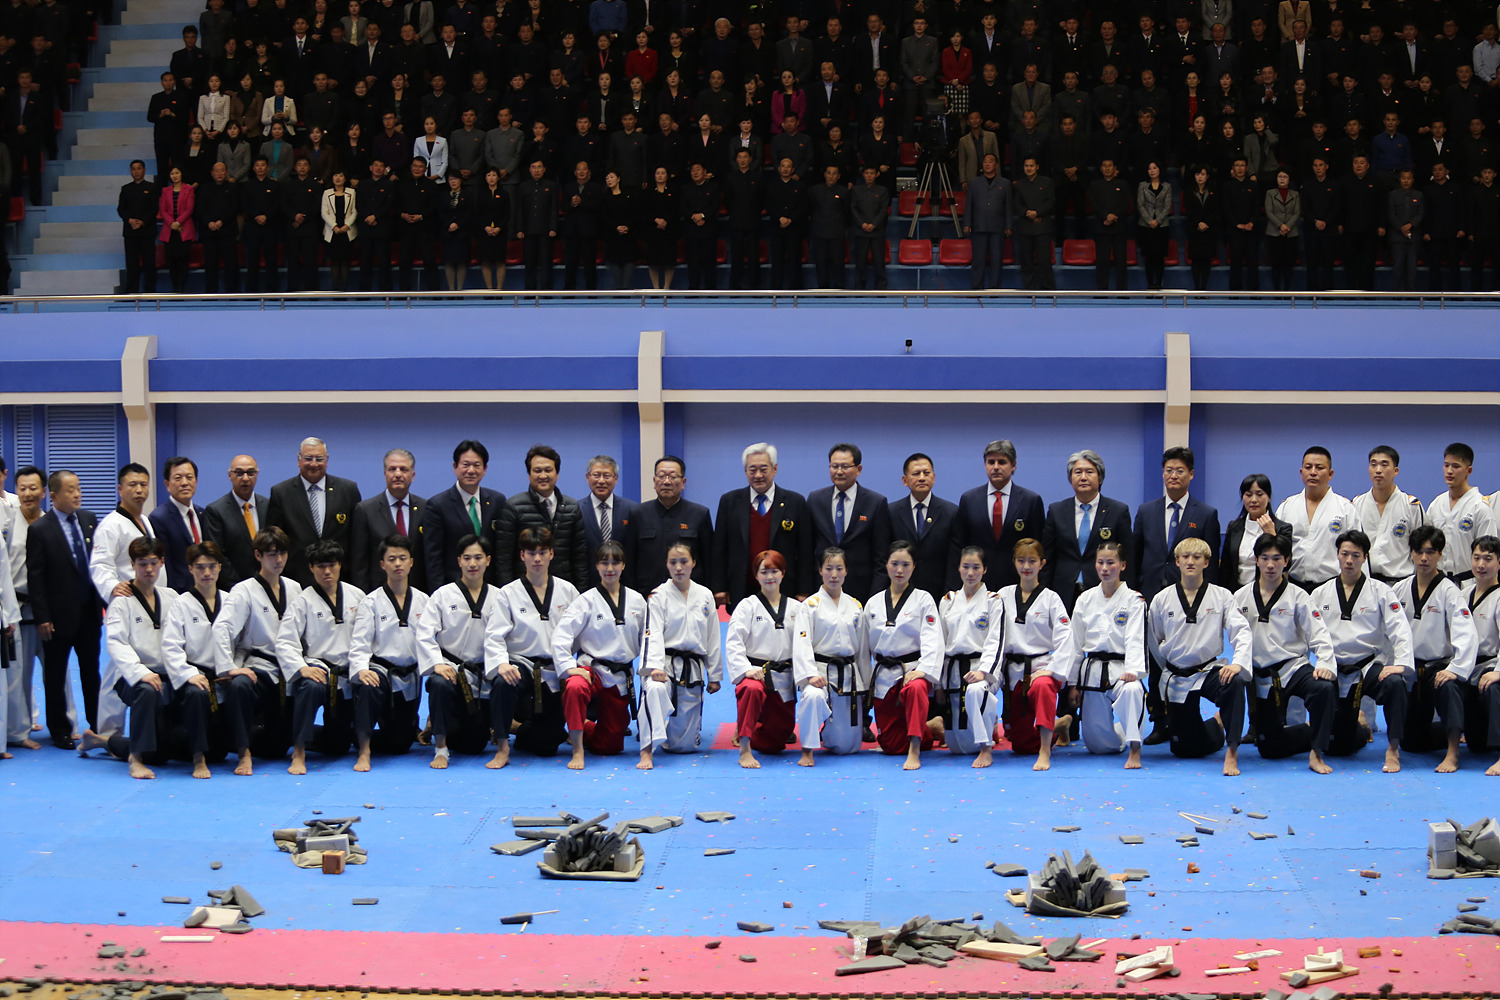 Group photo after WT-ITF joint demonstration team finished their joint performance on Nov. 2, 2018 at Pyongyang Taekwondo Hall in North Korea